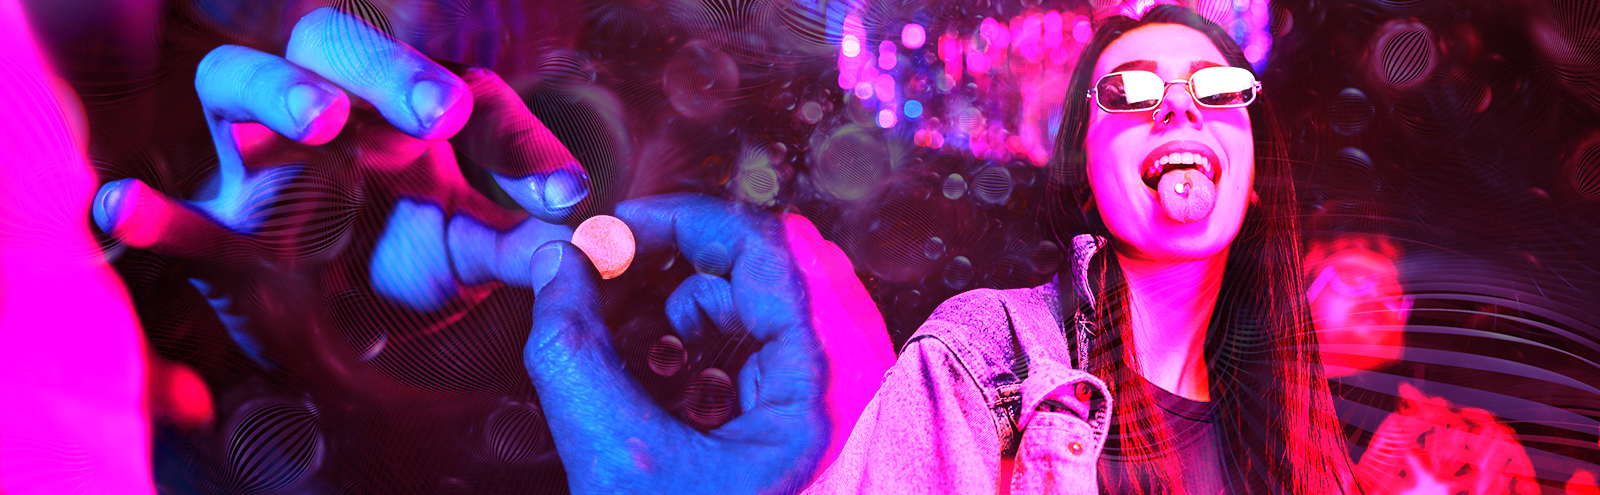 We Asked A Doctor About The Safety Of Casual MDMA -- AKA Molly -- image